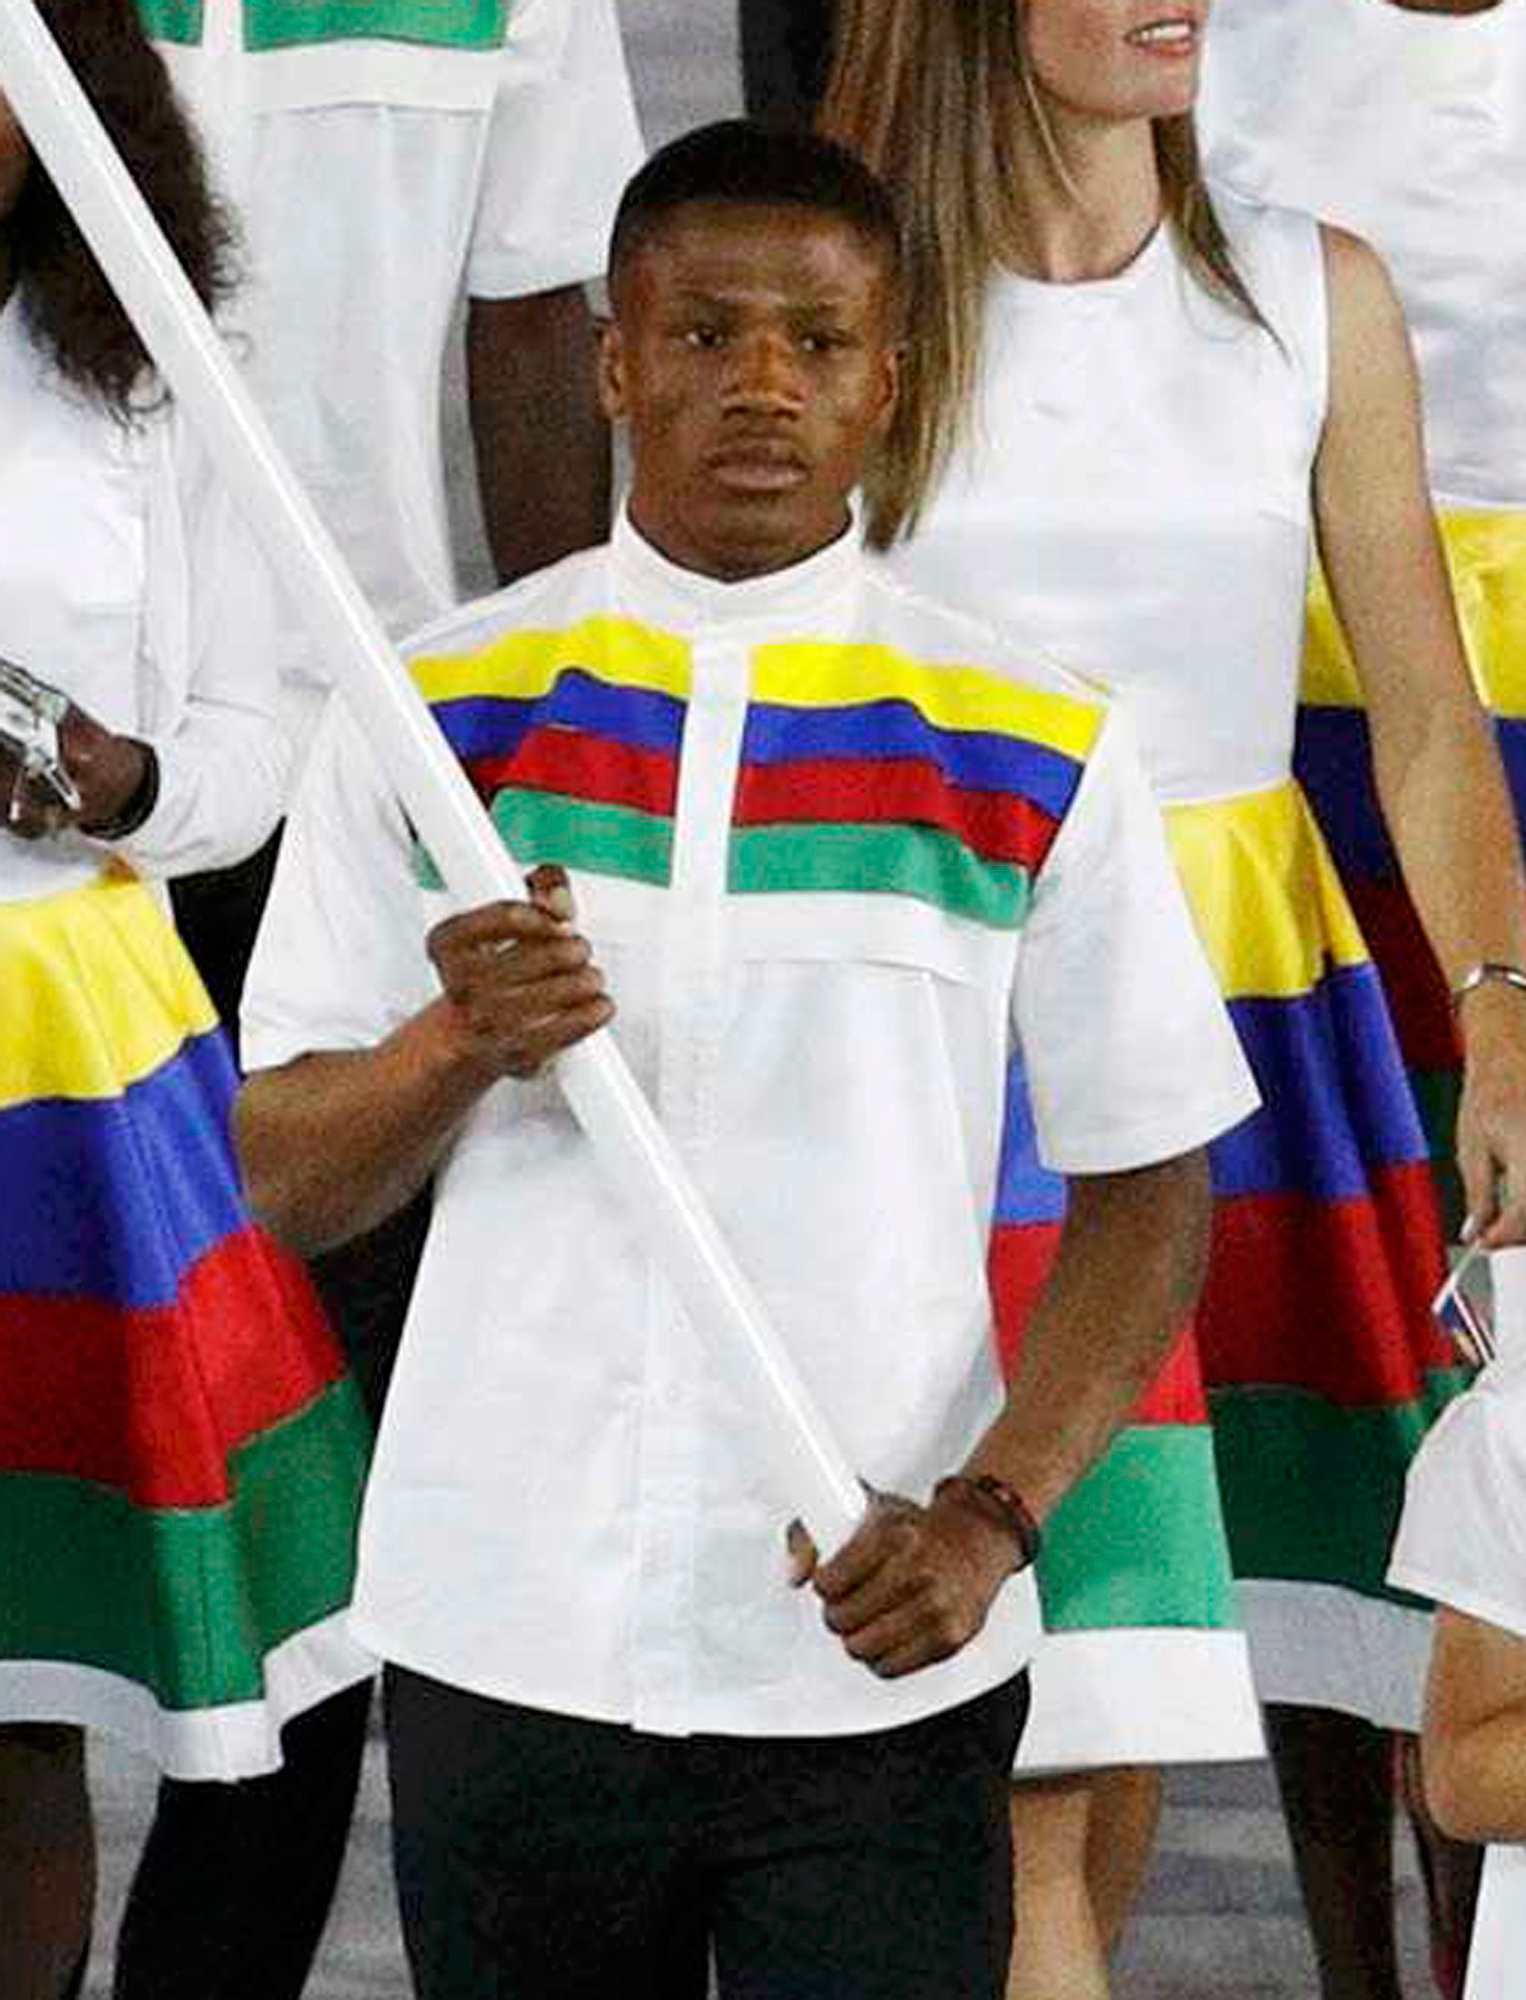 2016 Rio Olympics - Maracana - Rio de Janeiro, Brazil - 05/08/2016. Flagbearer Jonas Junius (NAM) of Namibia leads his contingent during the opening ceremony. Brazilian police have arrested Junius on suspicion of attempting to secually assault a room maid at the Olympic Village. REUTERS/Stoyan Nenov/Files FOR EDITORIAL USE ONLY. NOT FOR SALE FOR MARKETING OR ADVERTISING CAMPAIGNS.